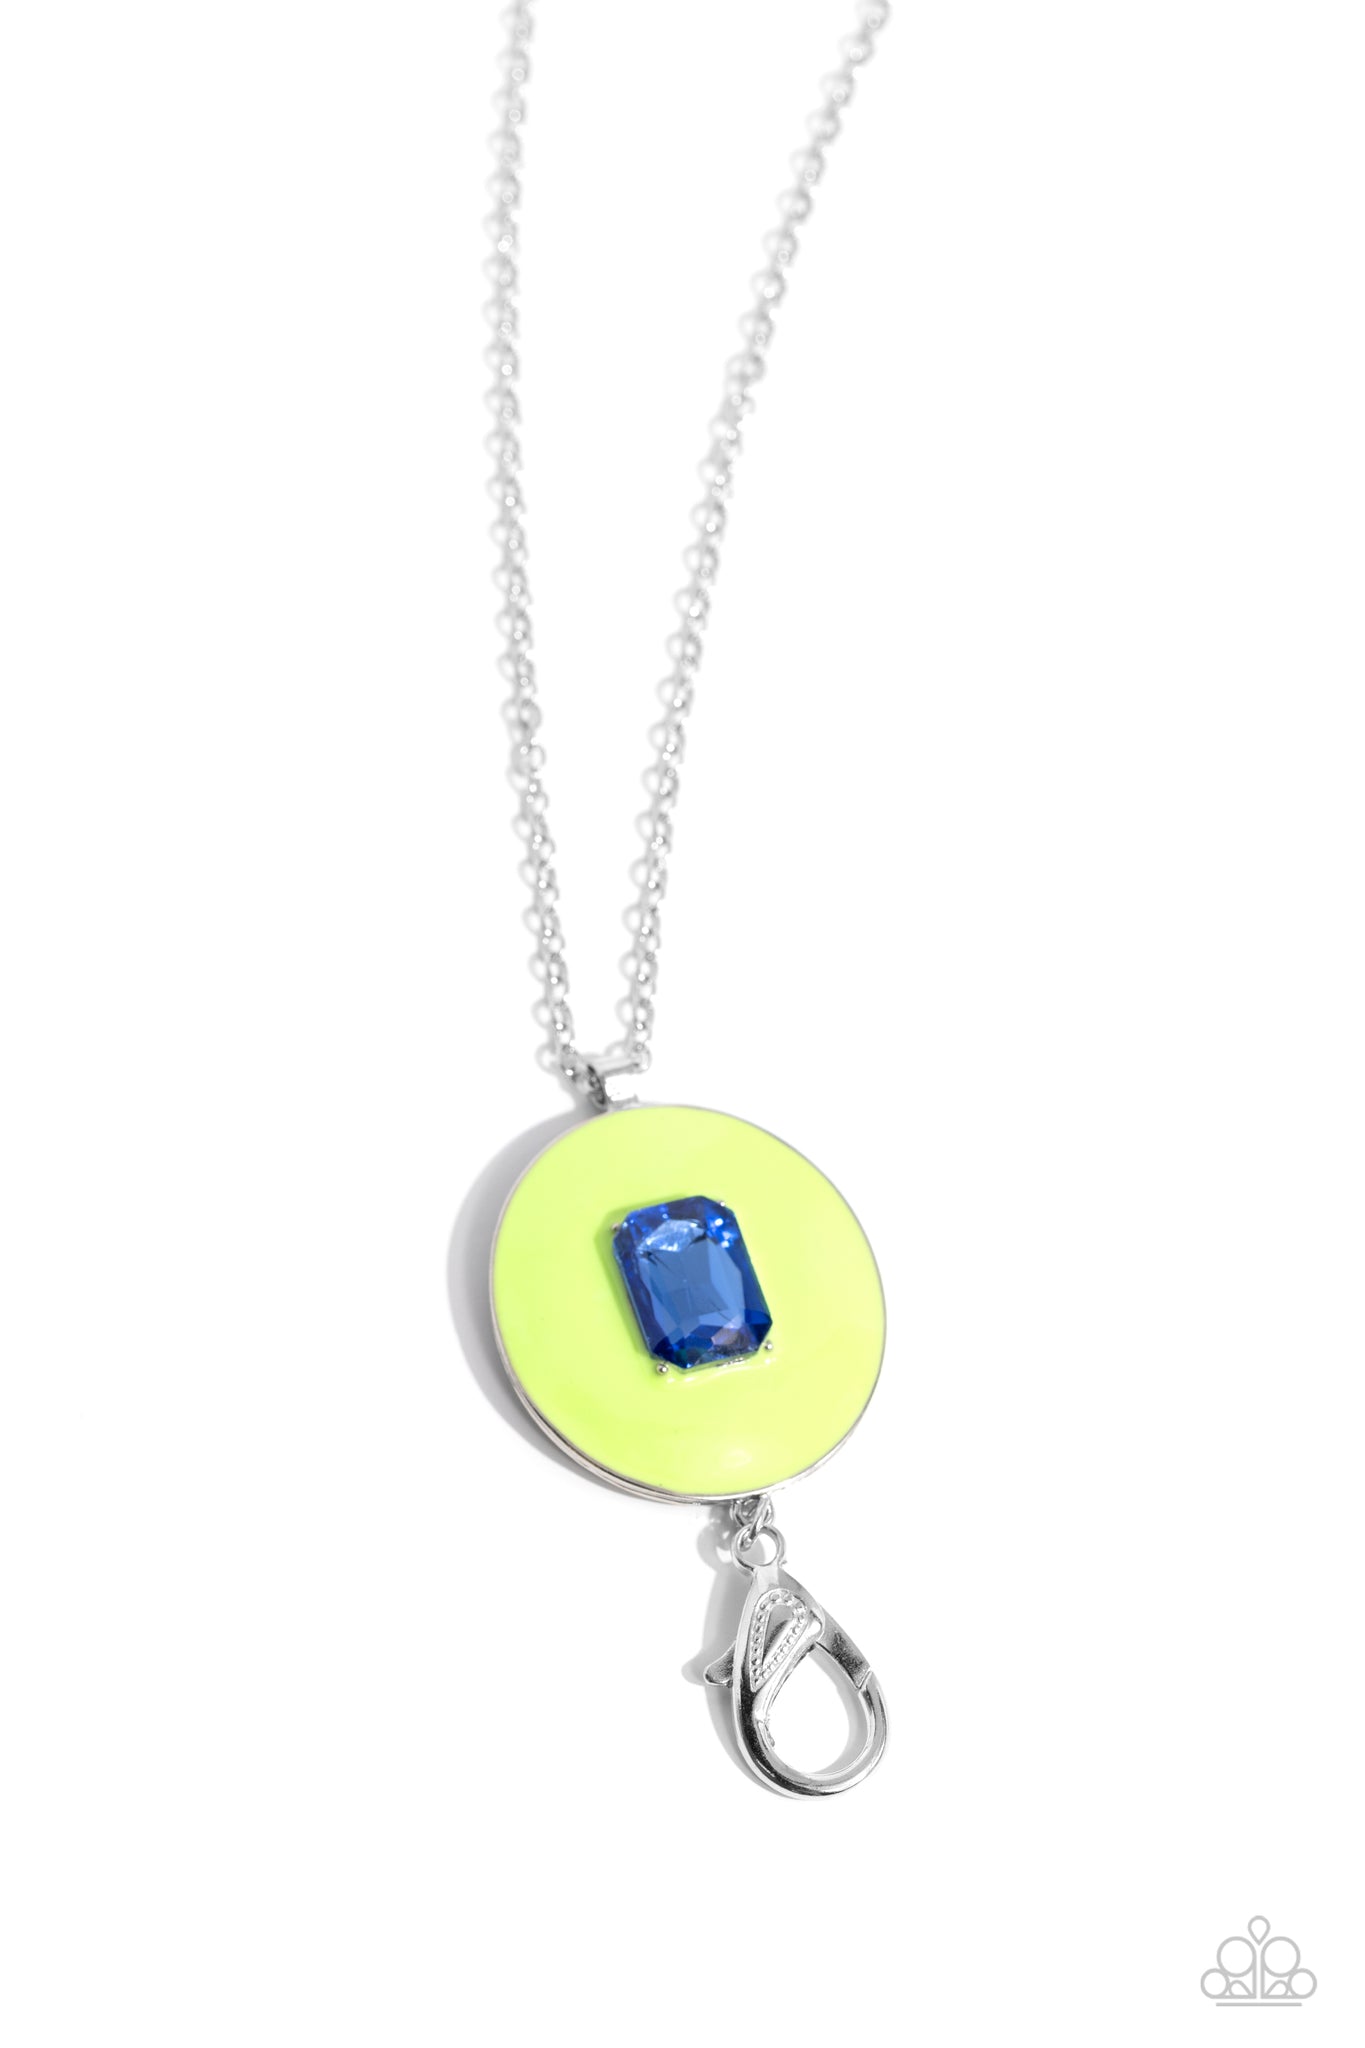 Caliber Collision Green Necklace